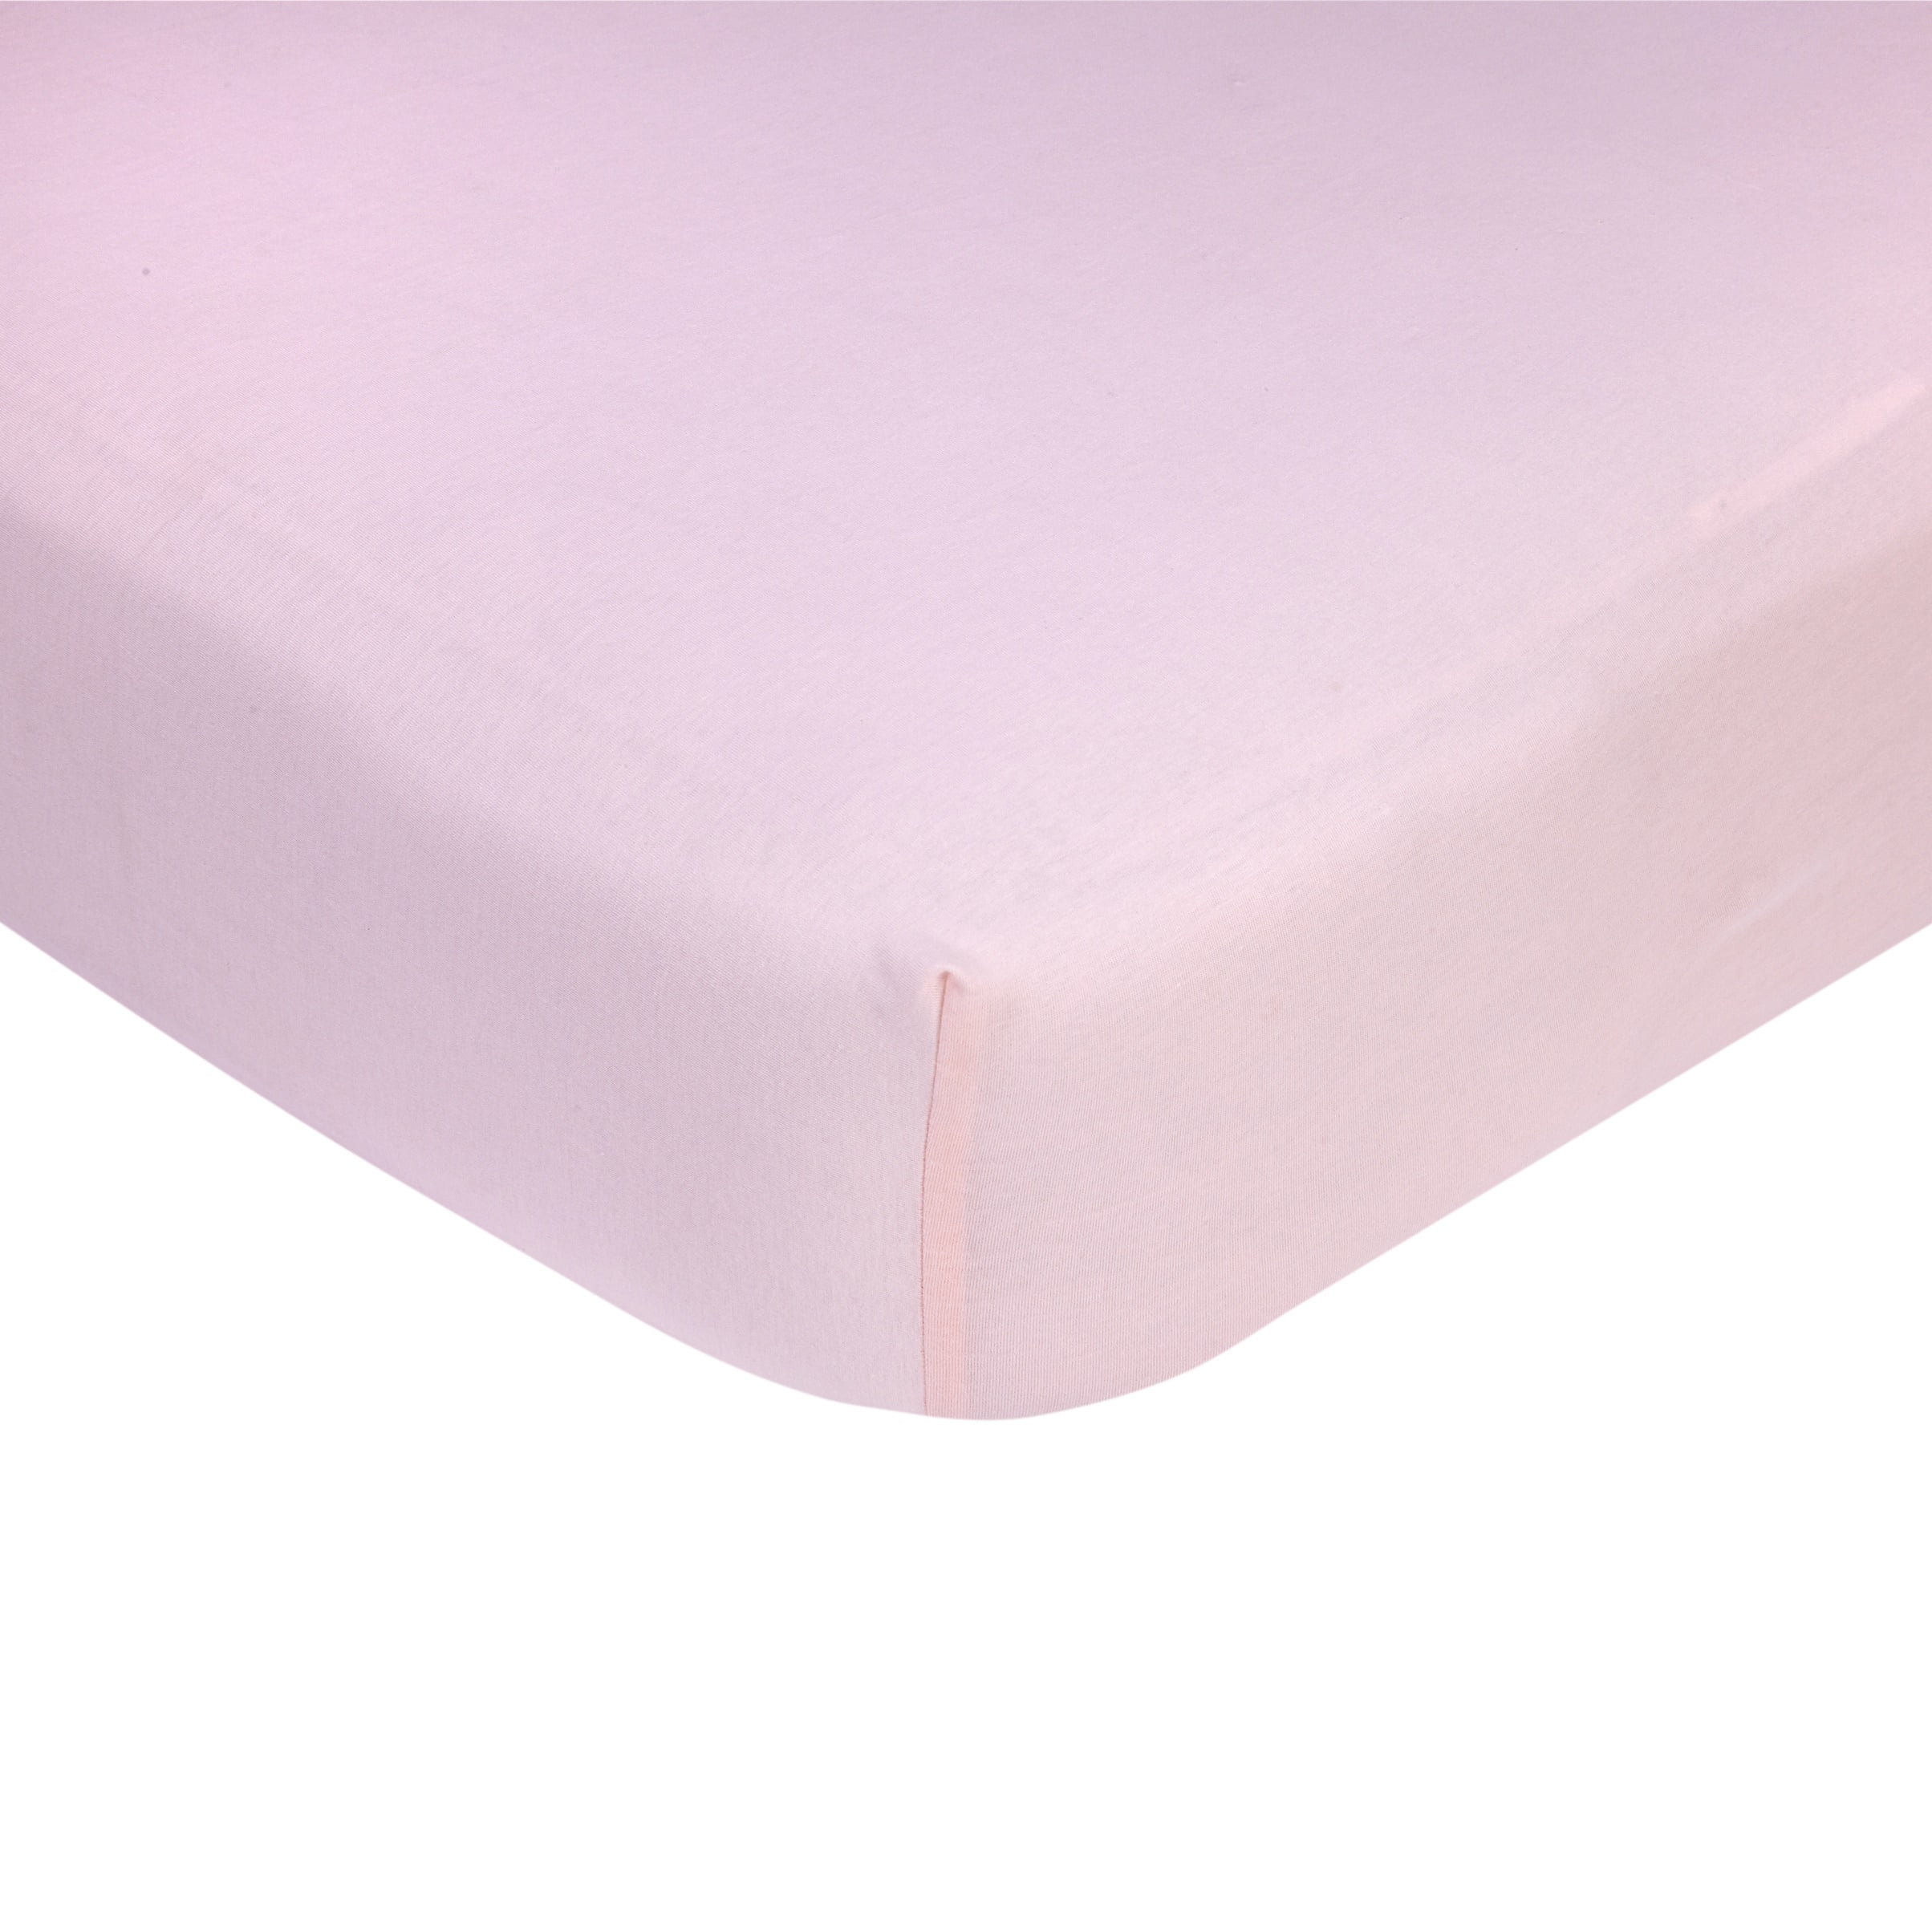 Carters Easy Fit Jersey Standard Crib Mattress Fitted 100% Cotton Sheet 